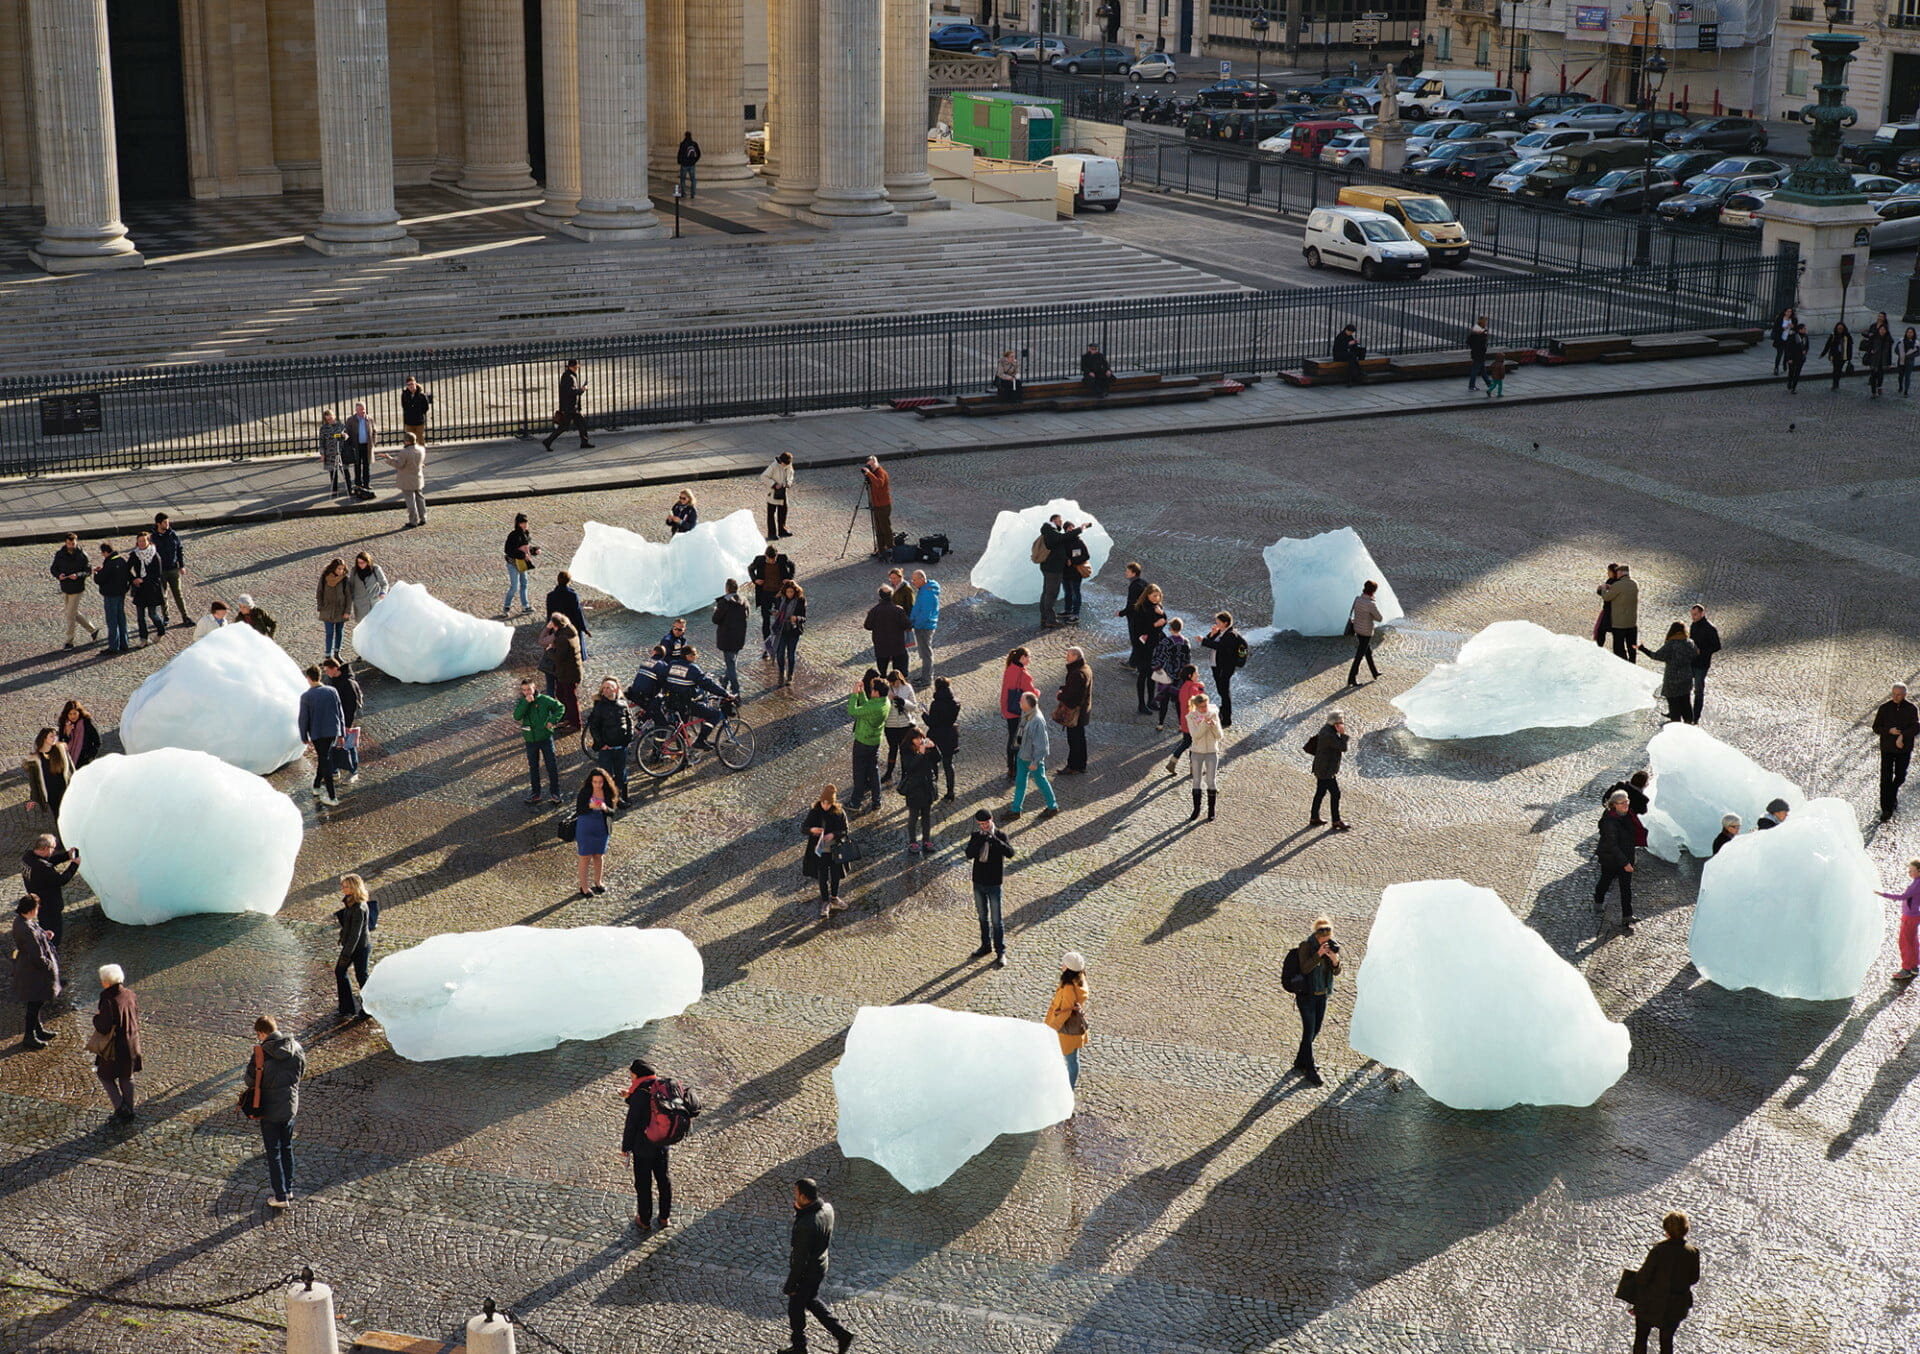 “Ice Watch” (2014), with Minik Rosing, 12 blocks of glacial ice, dimensions variable, installation views at Place du Panthéon, Paris. Photo by Martin Argyroglo